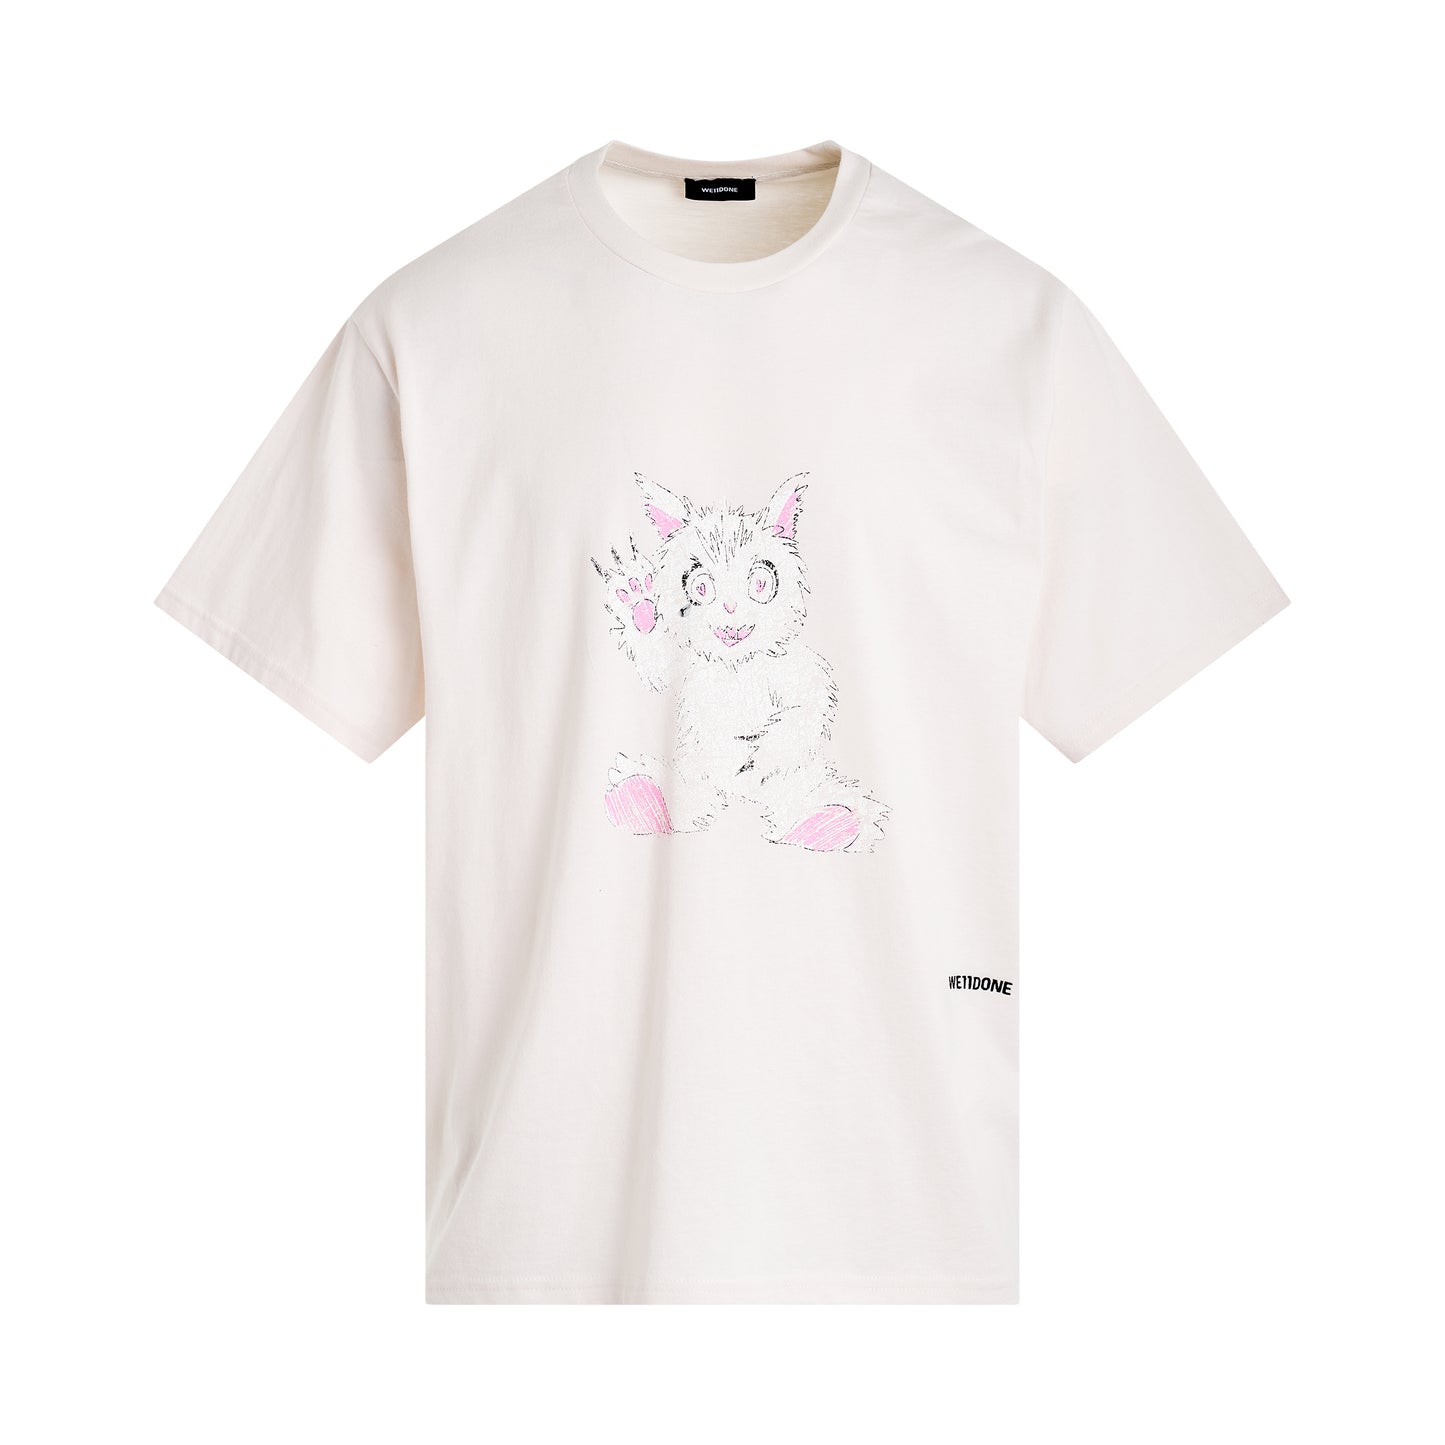 Washed Character T-Shirt in White